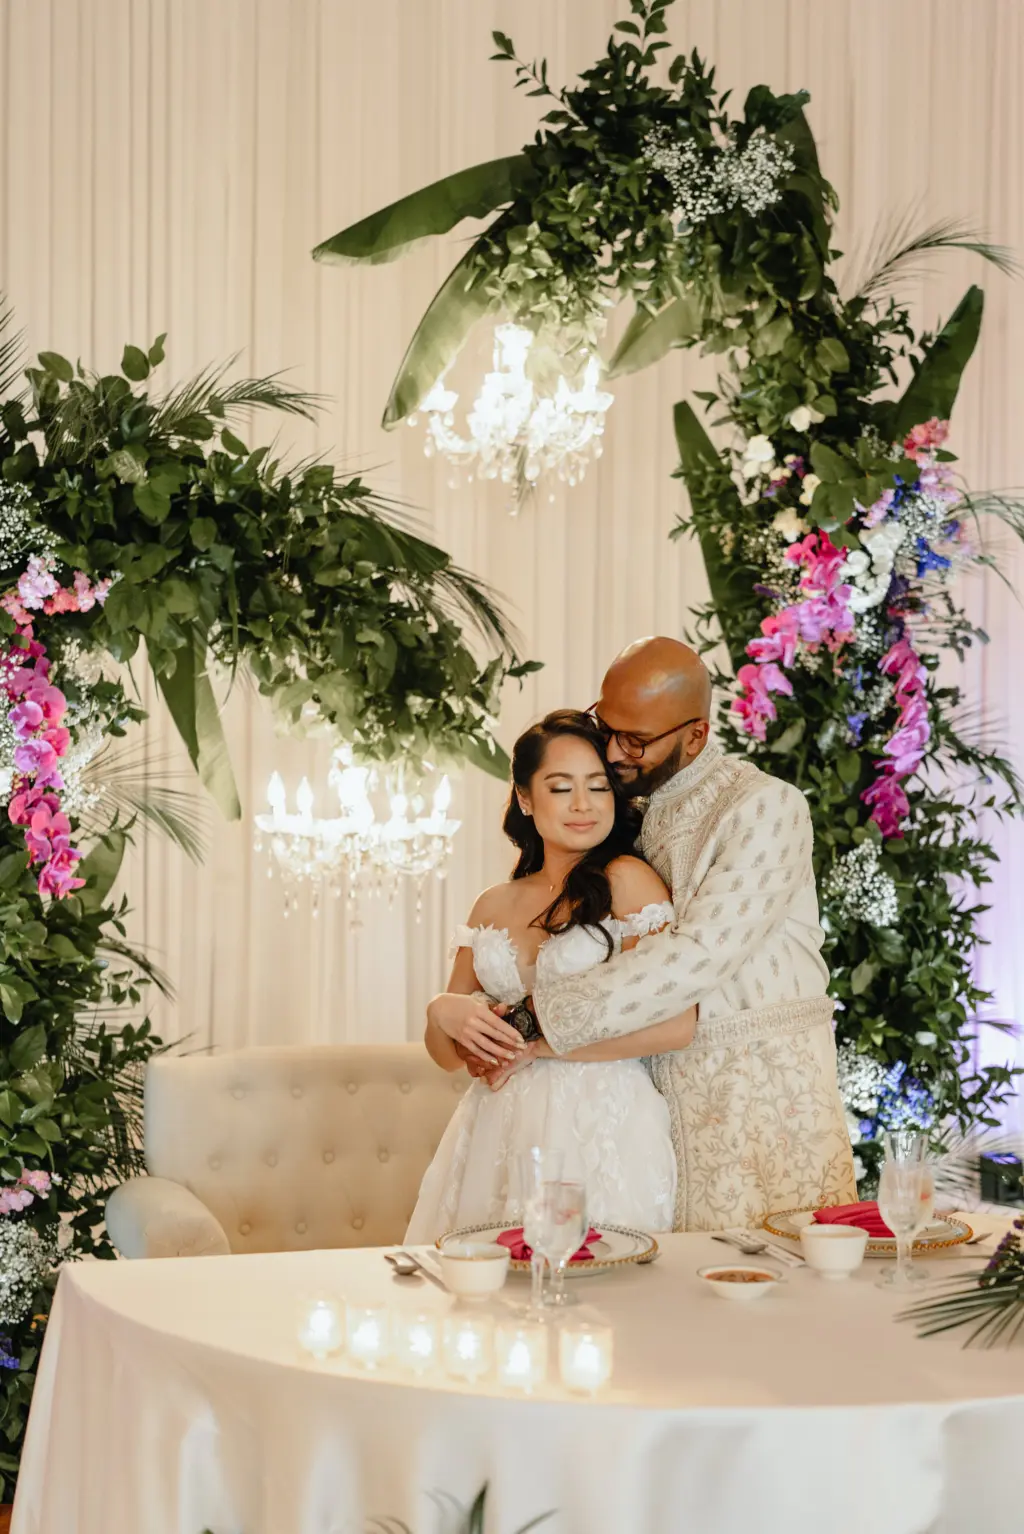 Bride and Groom at Floral Inspired Sweetheart Table Wedding Portrait | Tampa Wedding Photographer J&S Media